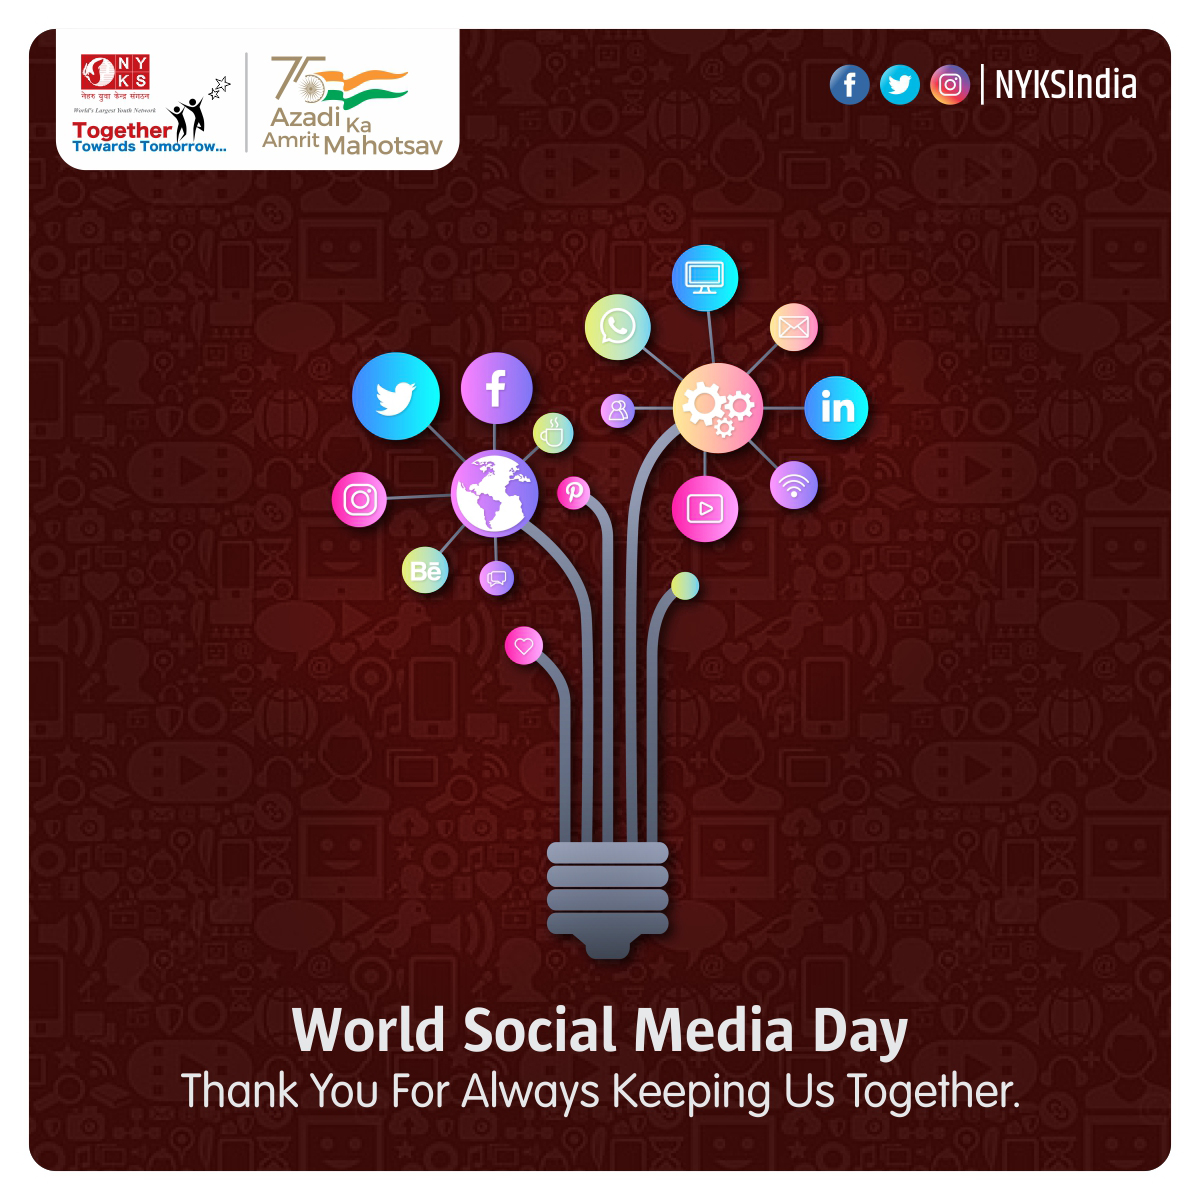 Social media is only as good as the posts on it, so use this occasion to add your voice! Post a selfie, a Tweet, or go live on Instagram or Facebook. #WorldSocialMediaDay #SocialMediaDay2022